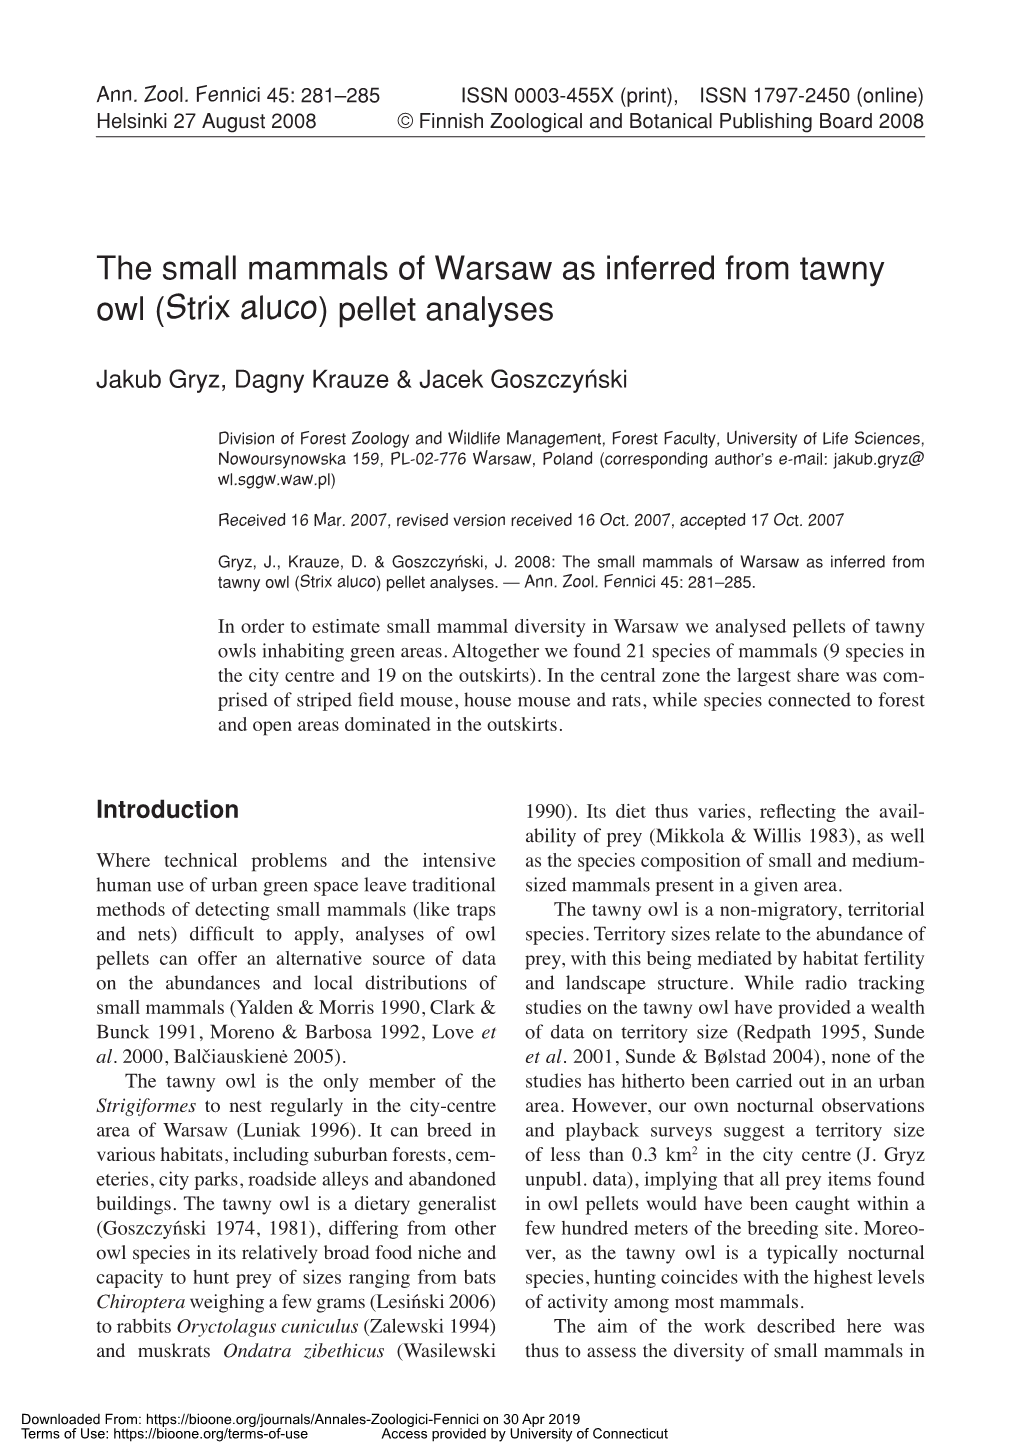 The Small Mammals of Warsaw As Inferred from Tawny Owl (Strix Aluco) Pellet Analyses